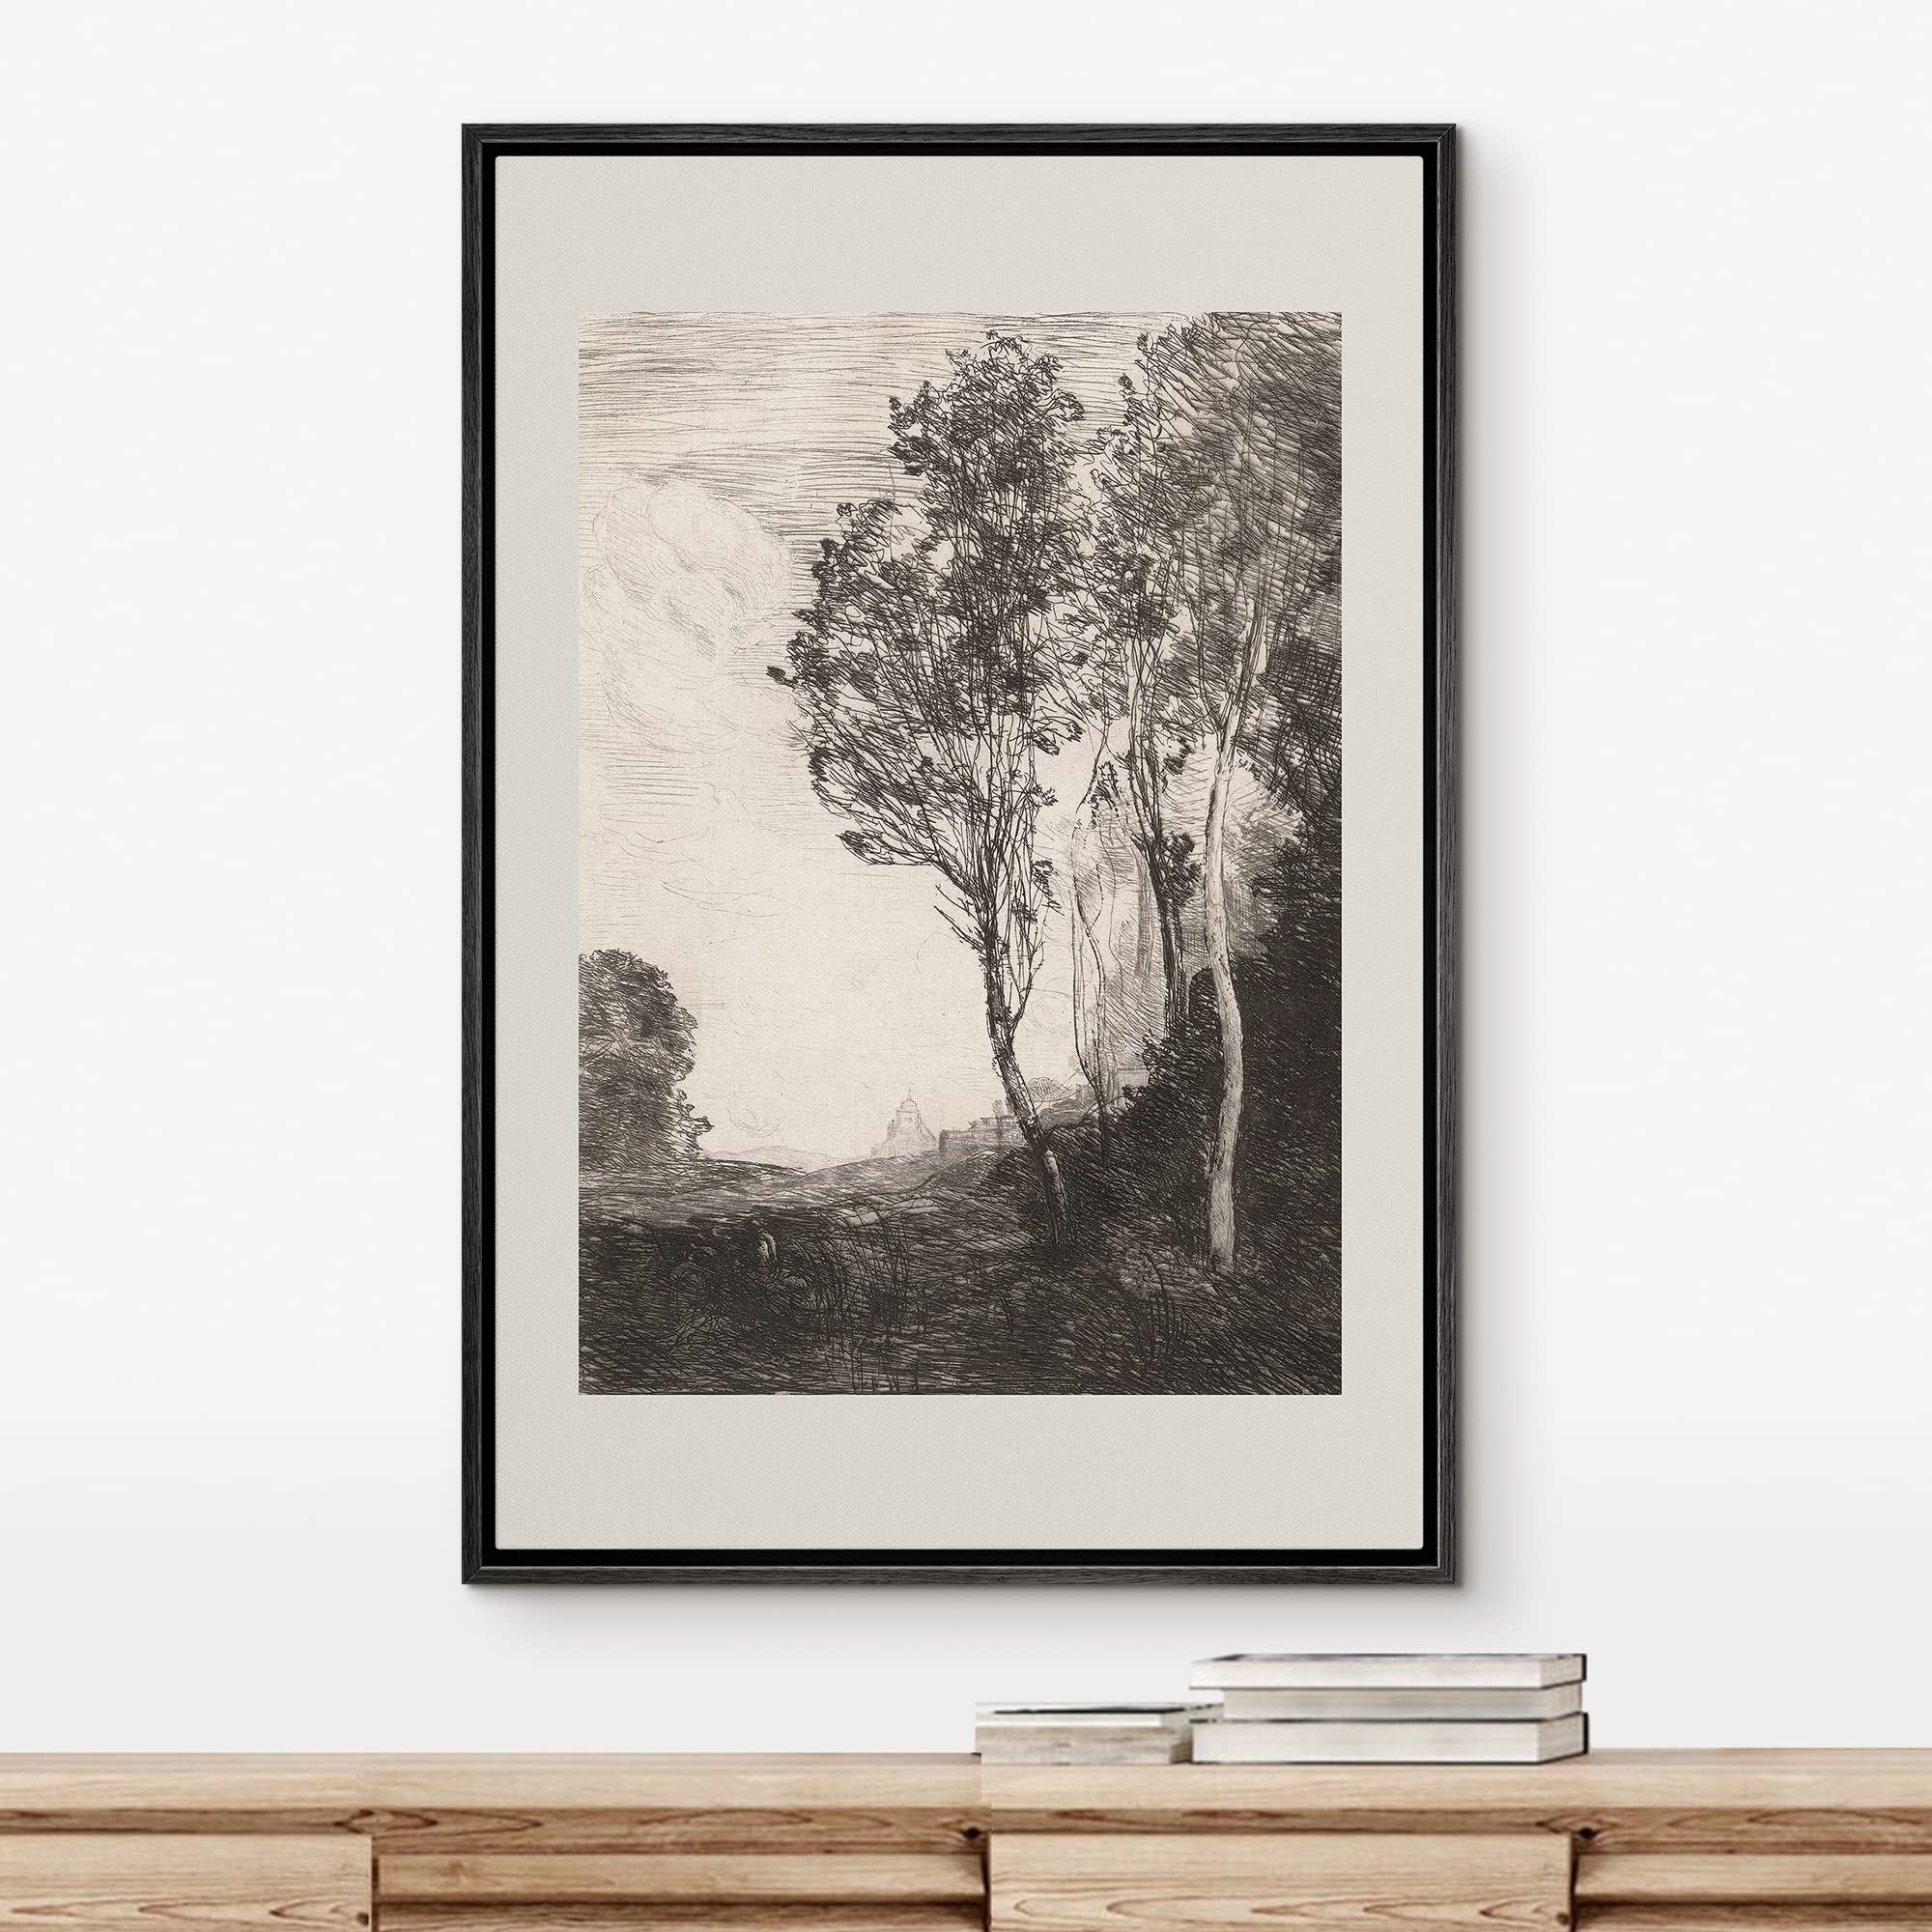 IDEA4WALL Framed Canvas Print Wall Art Dark Country Tree Field Forest Nature Wilderness Illustrations Fine Art Decorative Elements Farmhouse/Country for Living Room, Bedroom, Office - 24"x36" Black | Amazon (US)